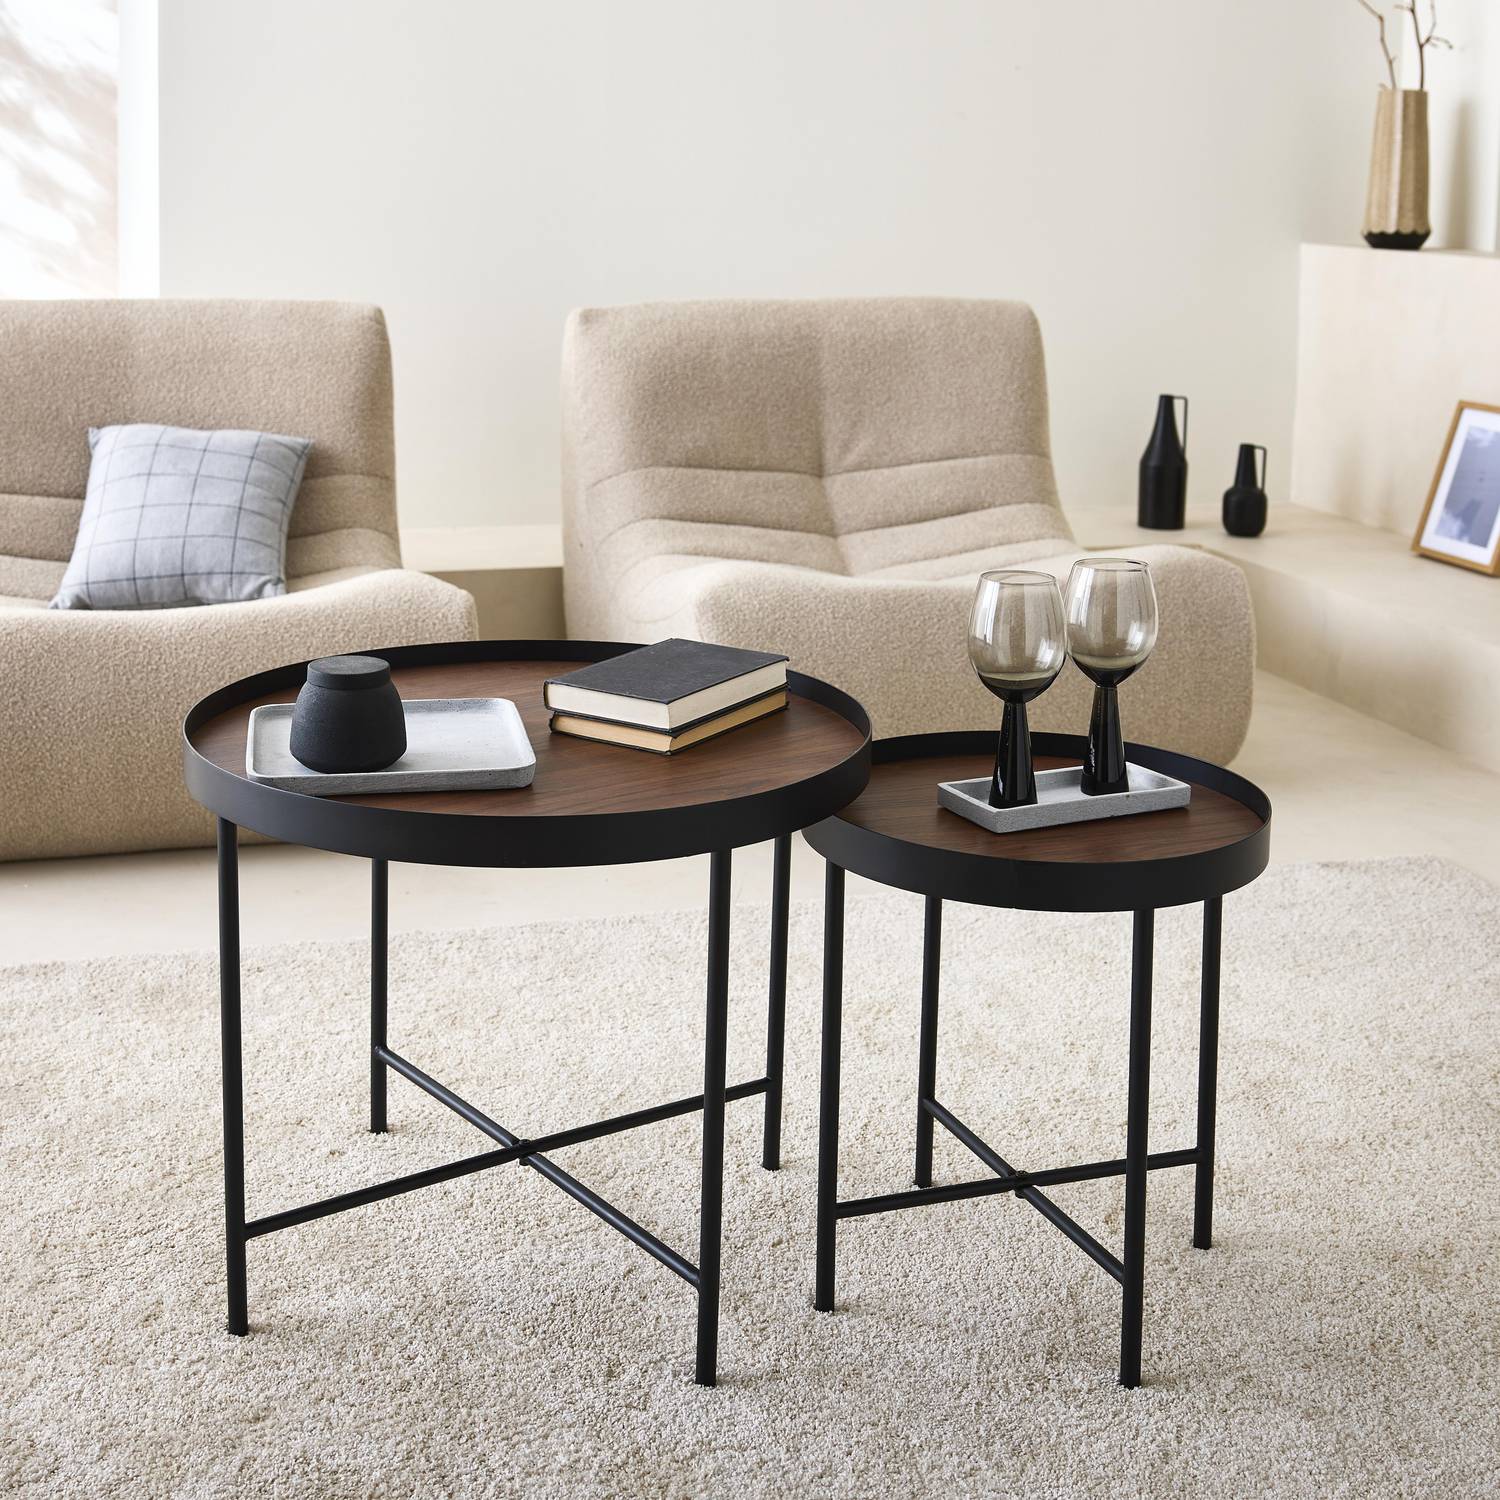 Set of 2 practical round nesting tables in walnut-effect MDF with black legs Photo1